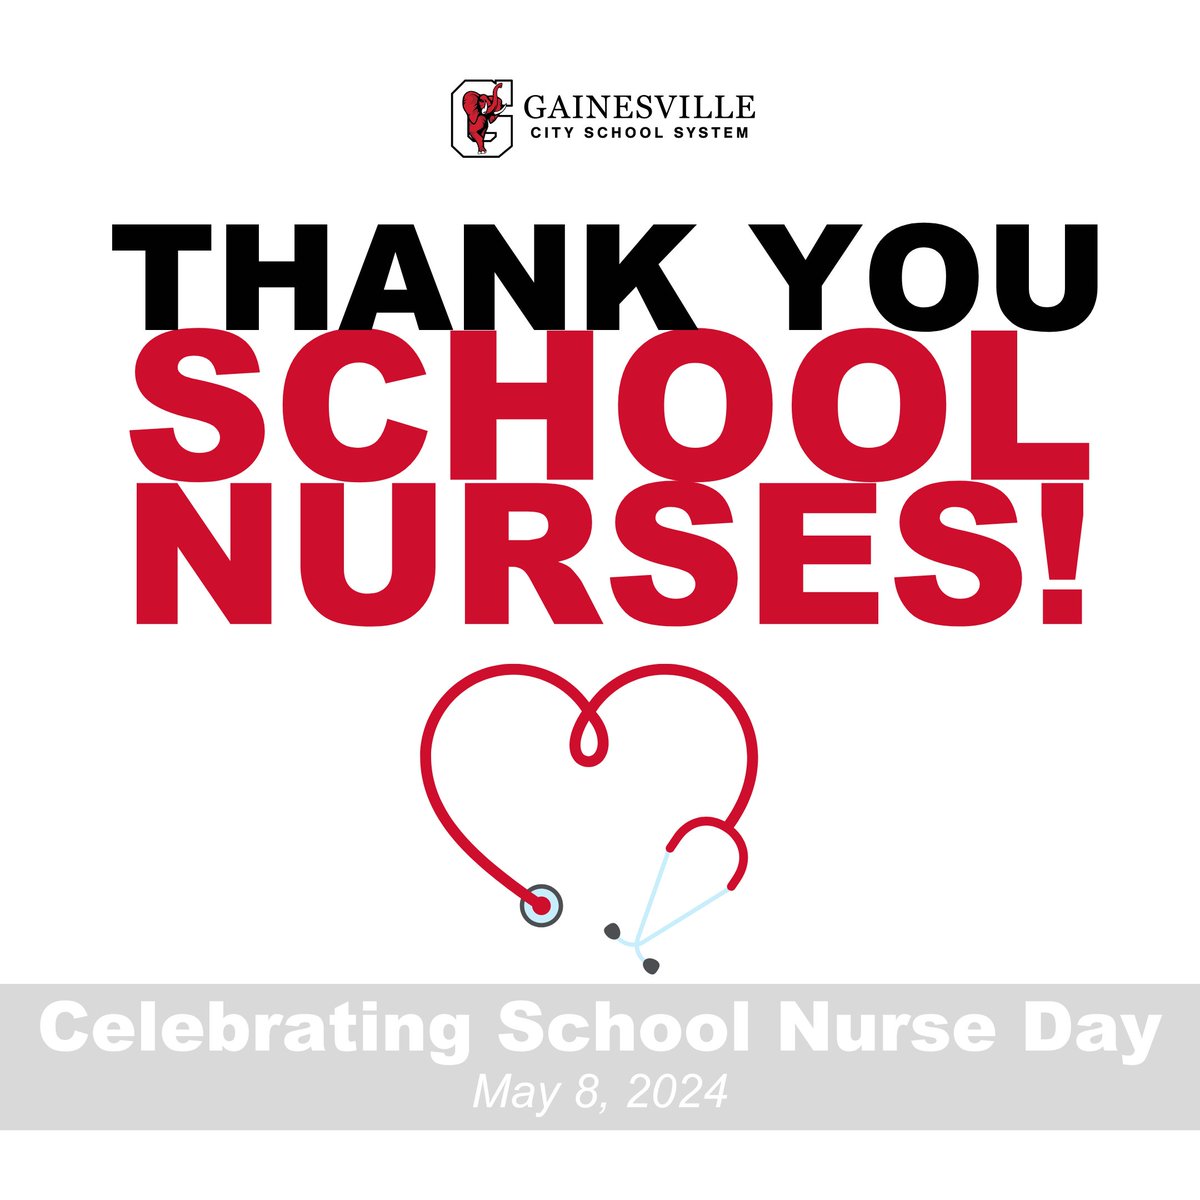 Today, we celebrate those who keep our schools healthy and safe. Thank you to all the dedicated school nurses for your compassion, care, and invaluable support. Happy School Nurse Day! #SchoolNurseDay #NurseAppreciation